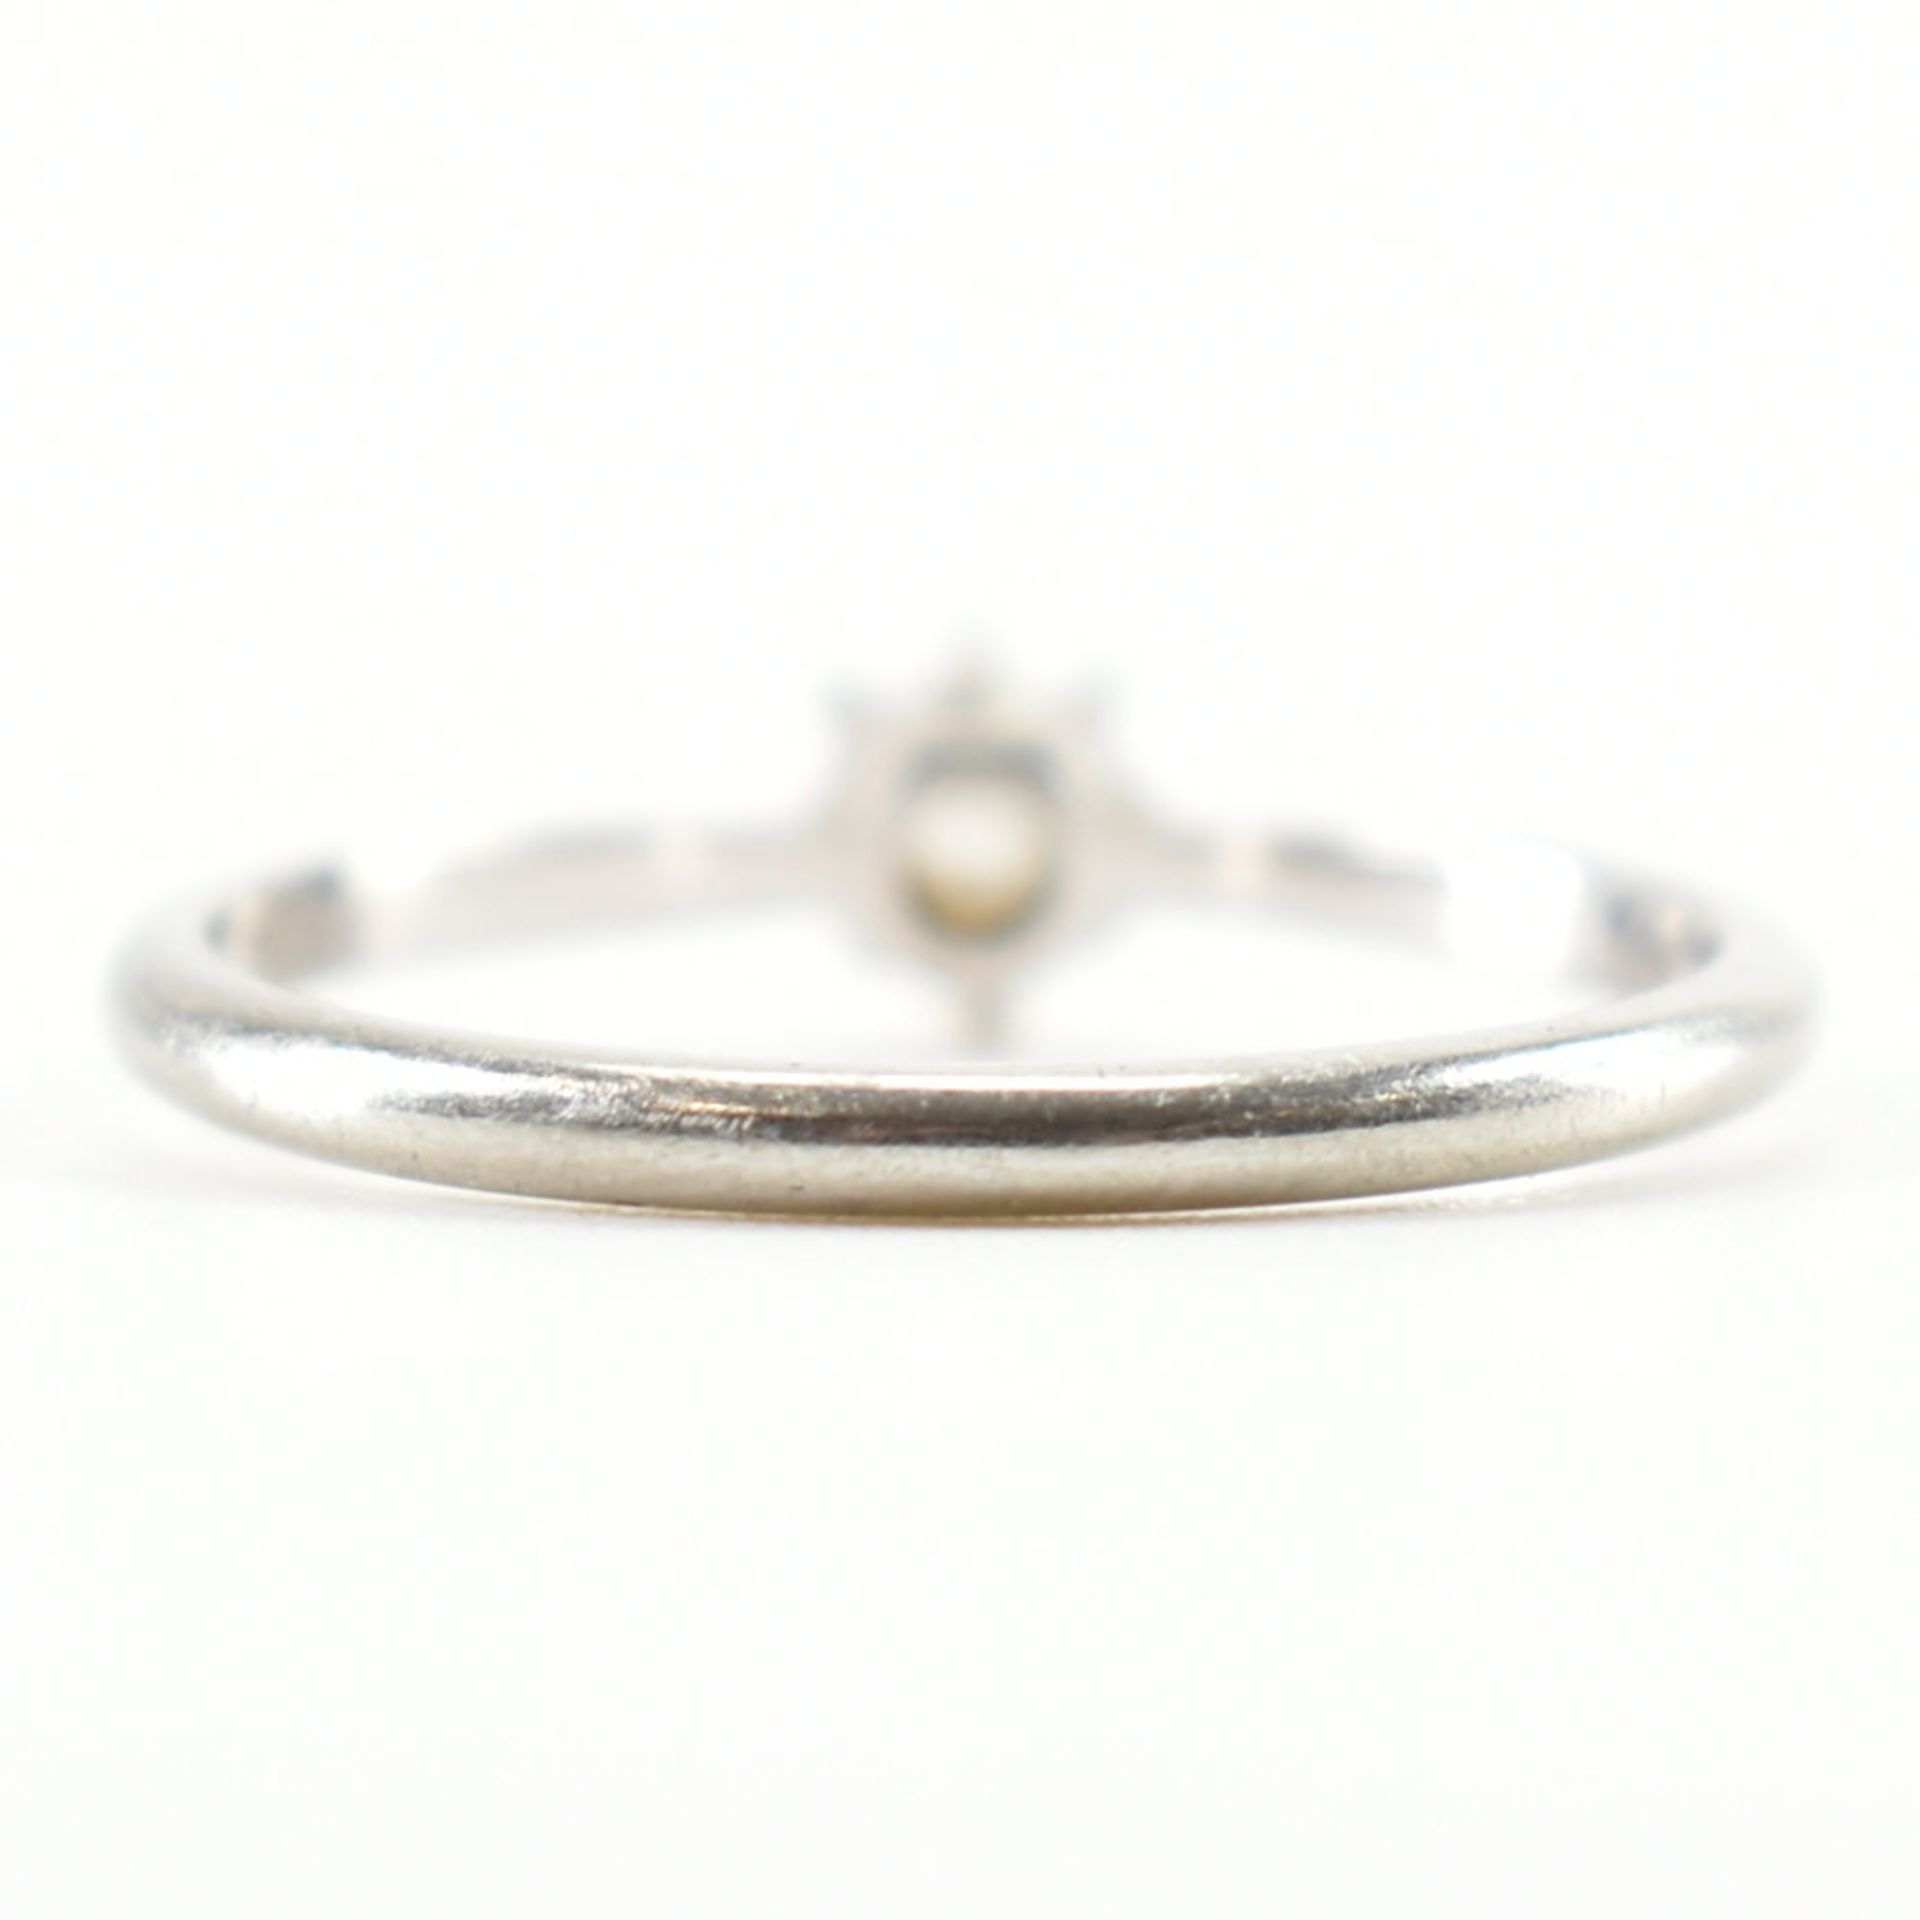 18CT WHITE GOLD & DIAMOND SOLITAIRE RING - Image 4 of 9